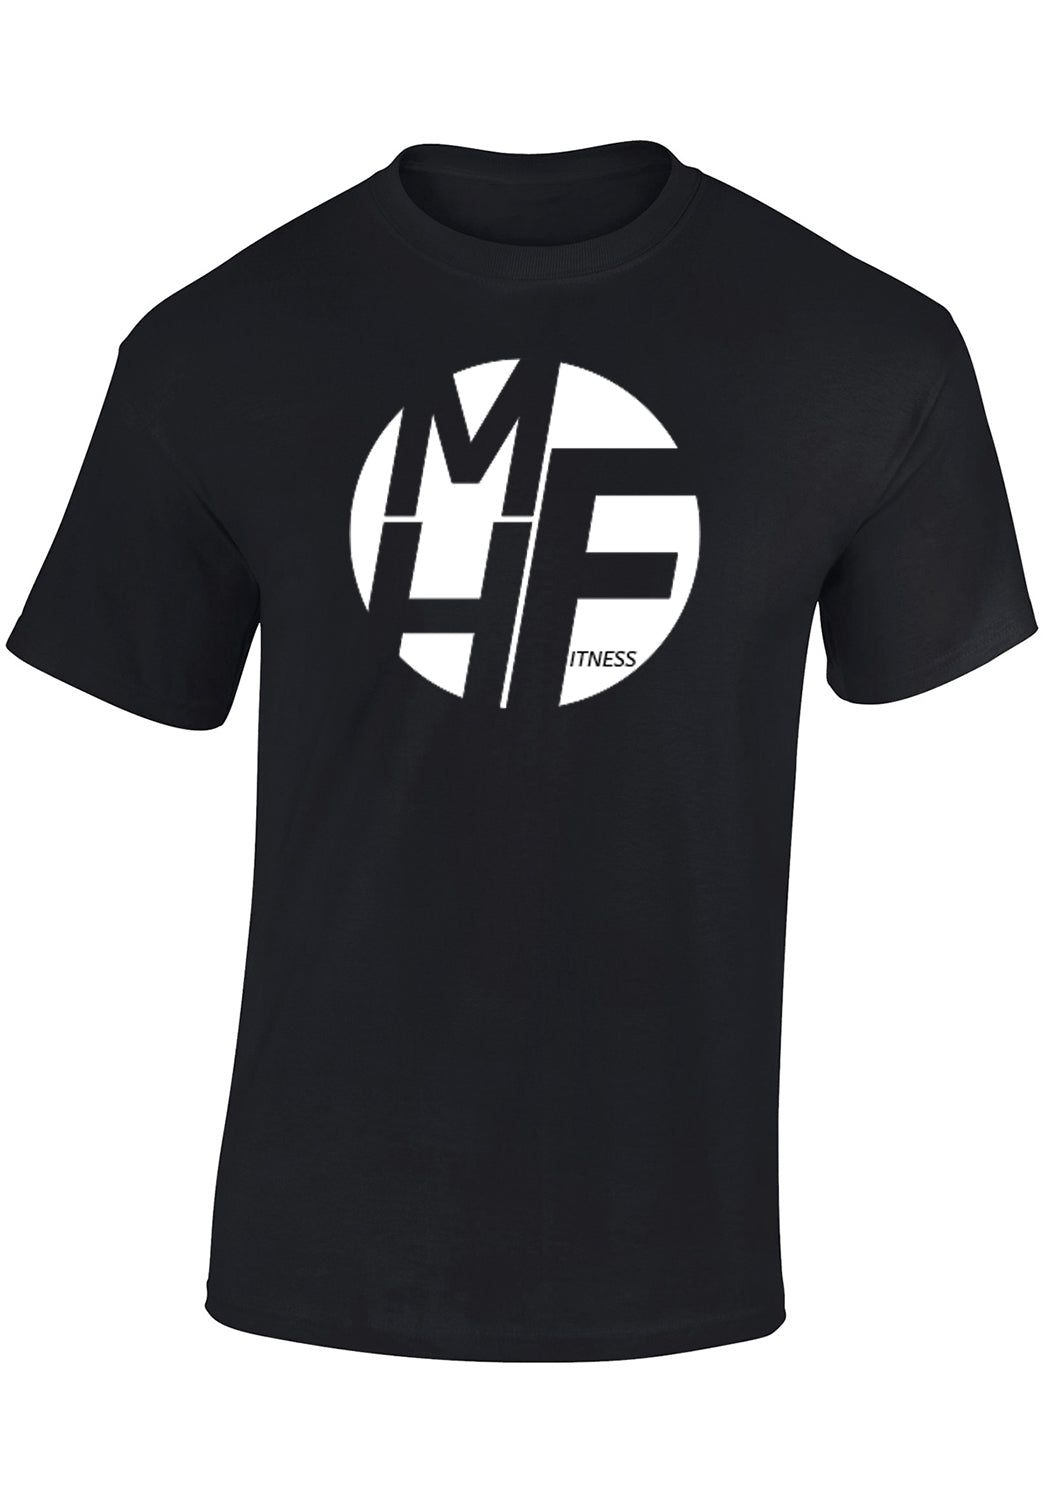 Limited Edition MHF T-shirt